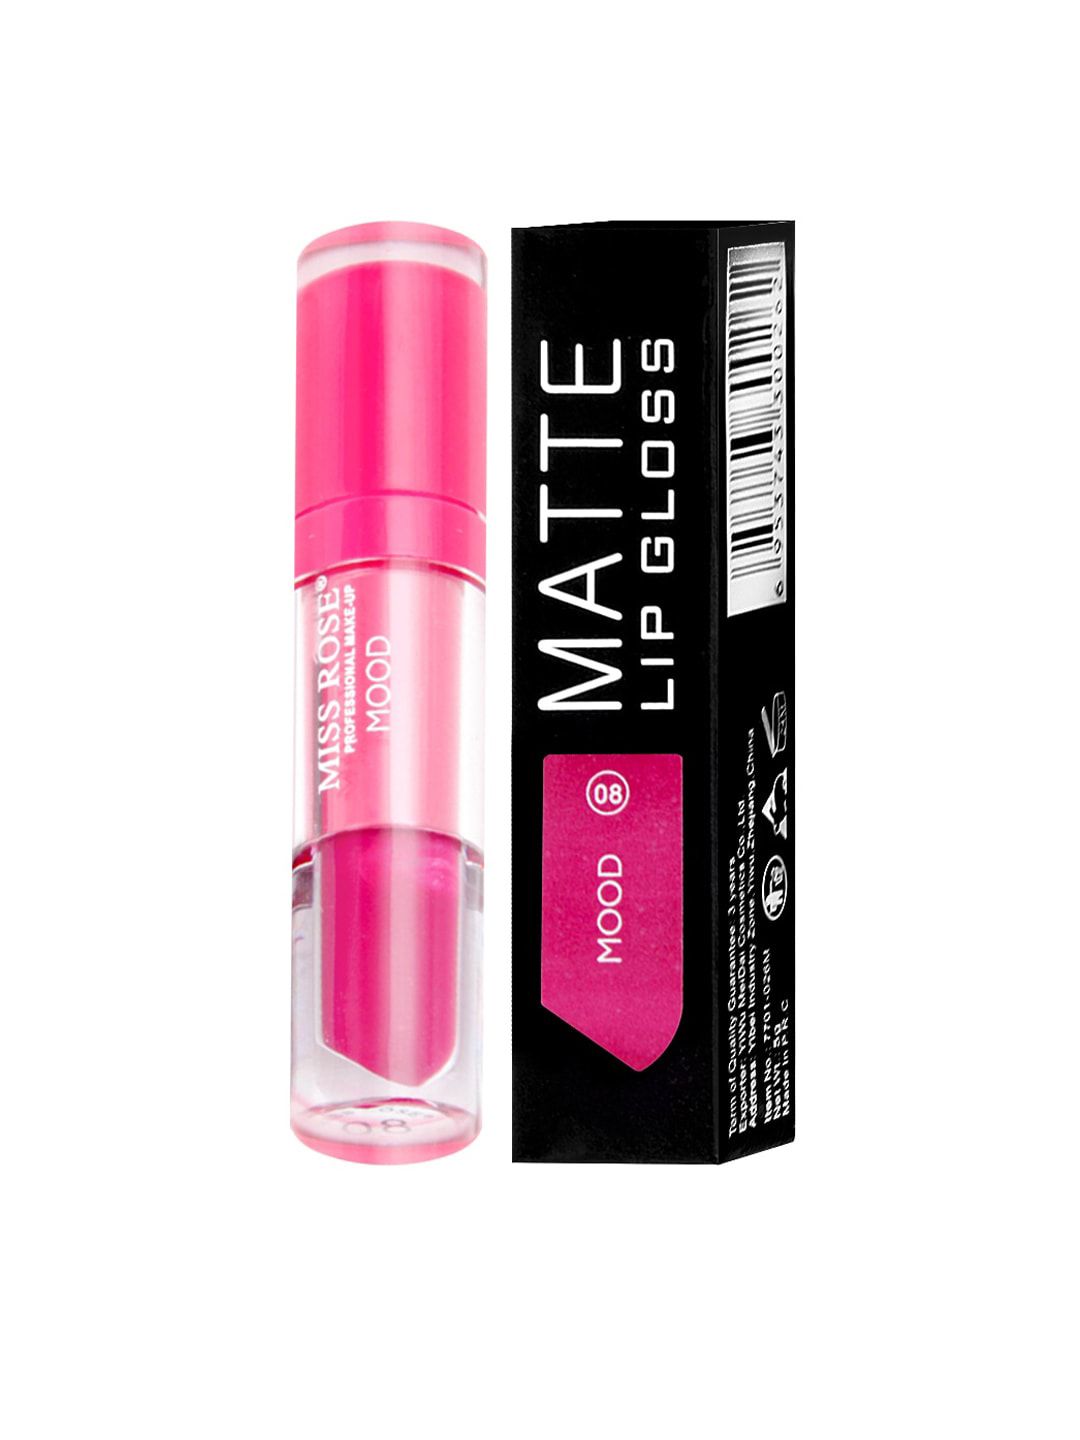 MISS ROSE Matte LipGloss Mood 7701-026M 08 20 gm Price in India